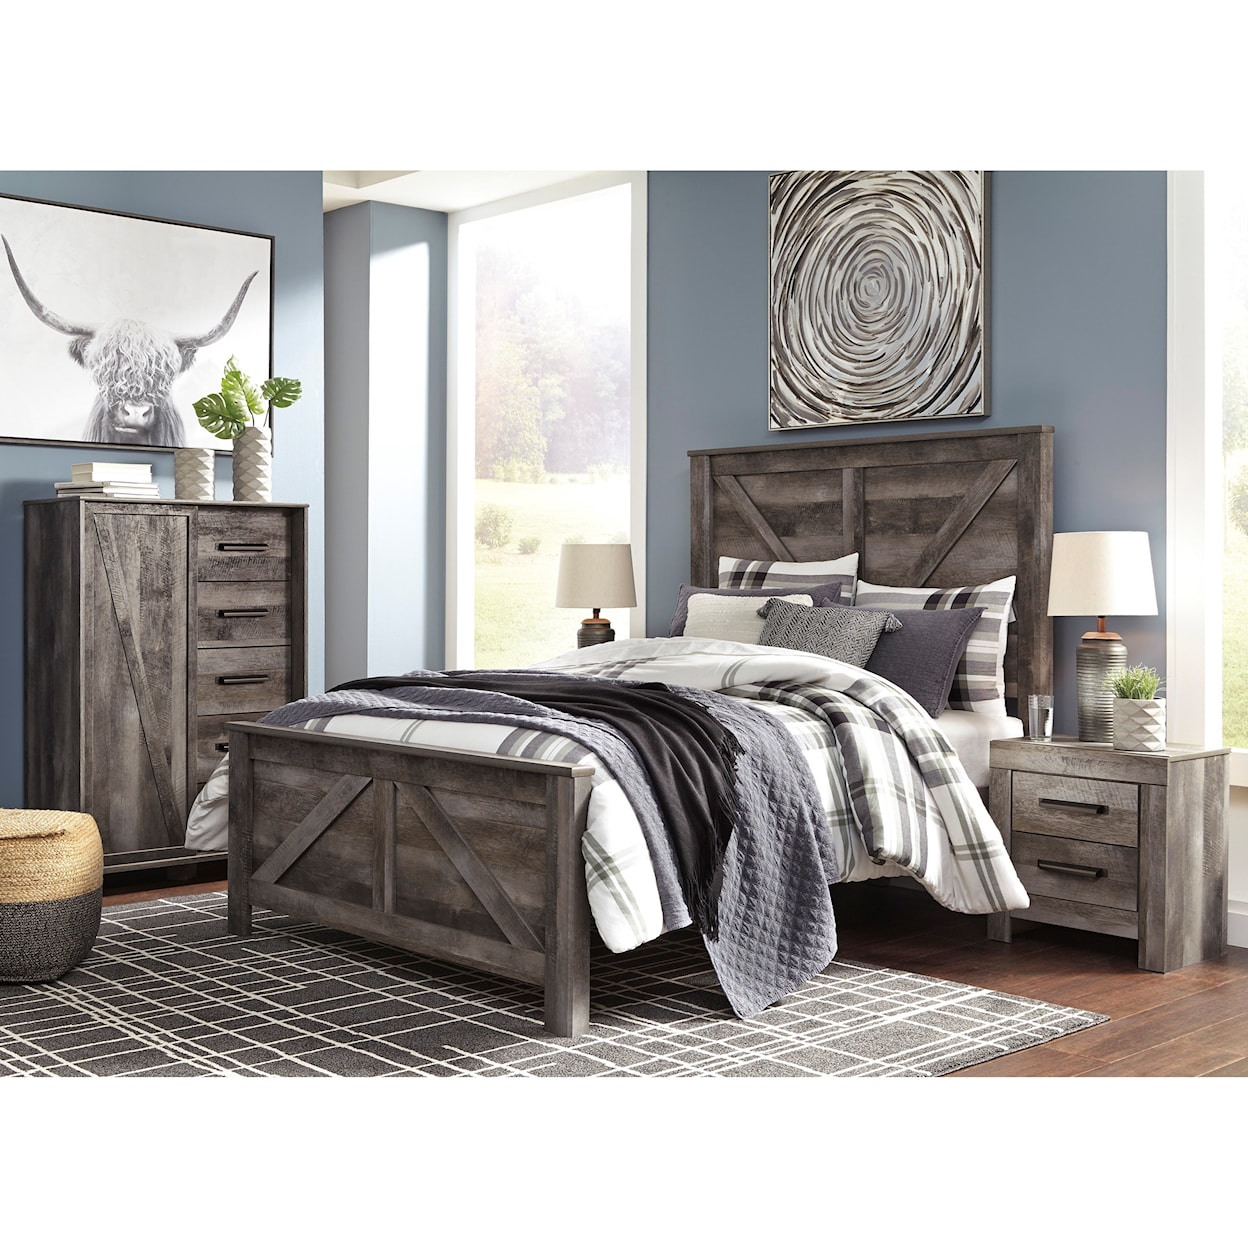 Signature Design by Ashley Wynnlow 4pc Queen Bedroom Group